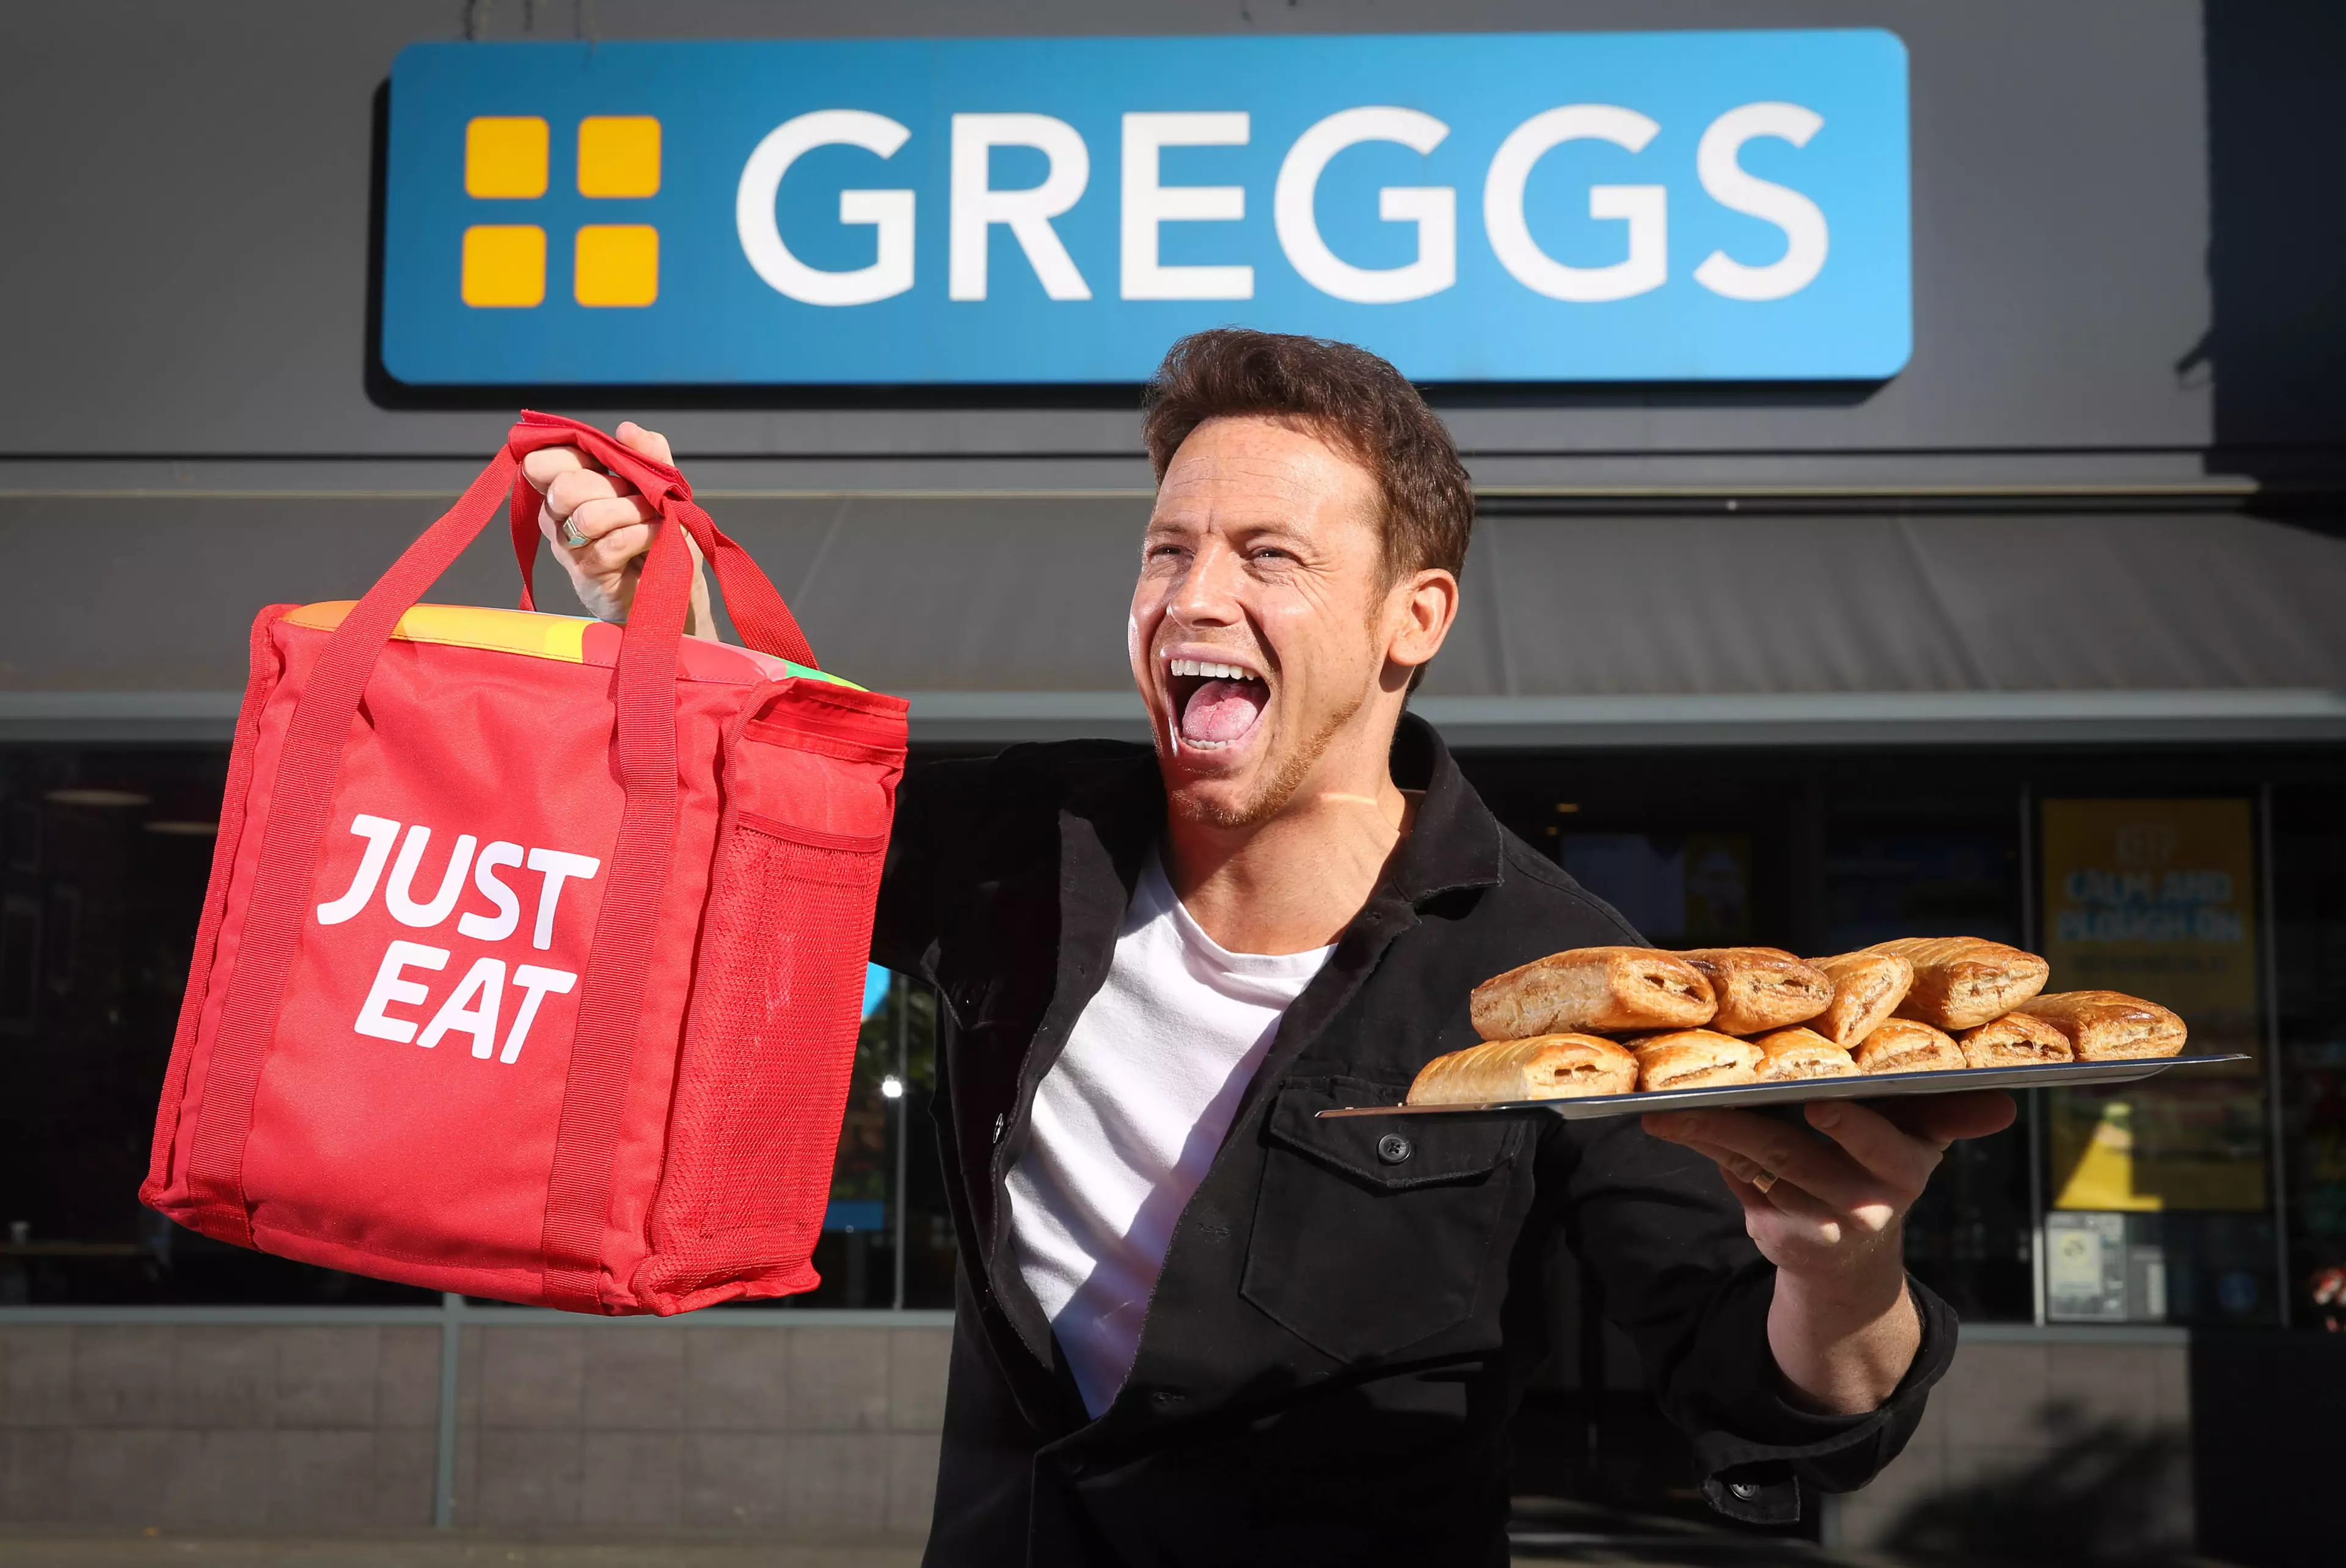 This is the... erm... interesting image Greggs used to announce trial delivery services last year.